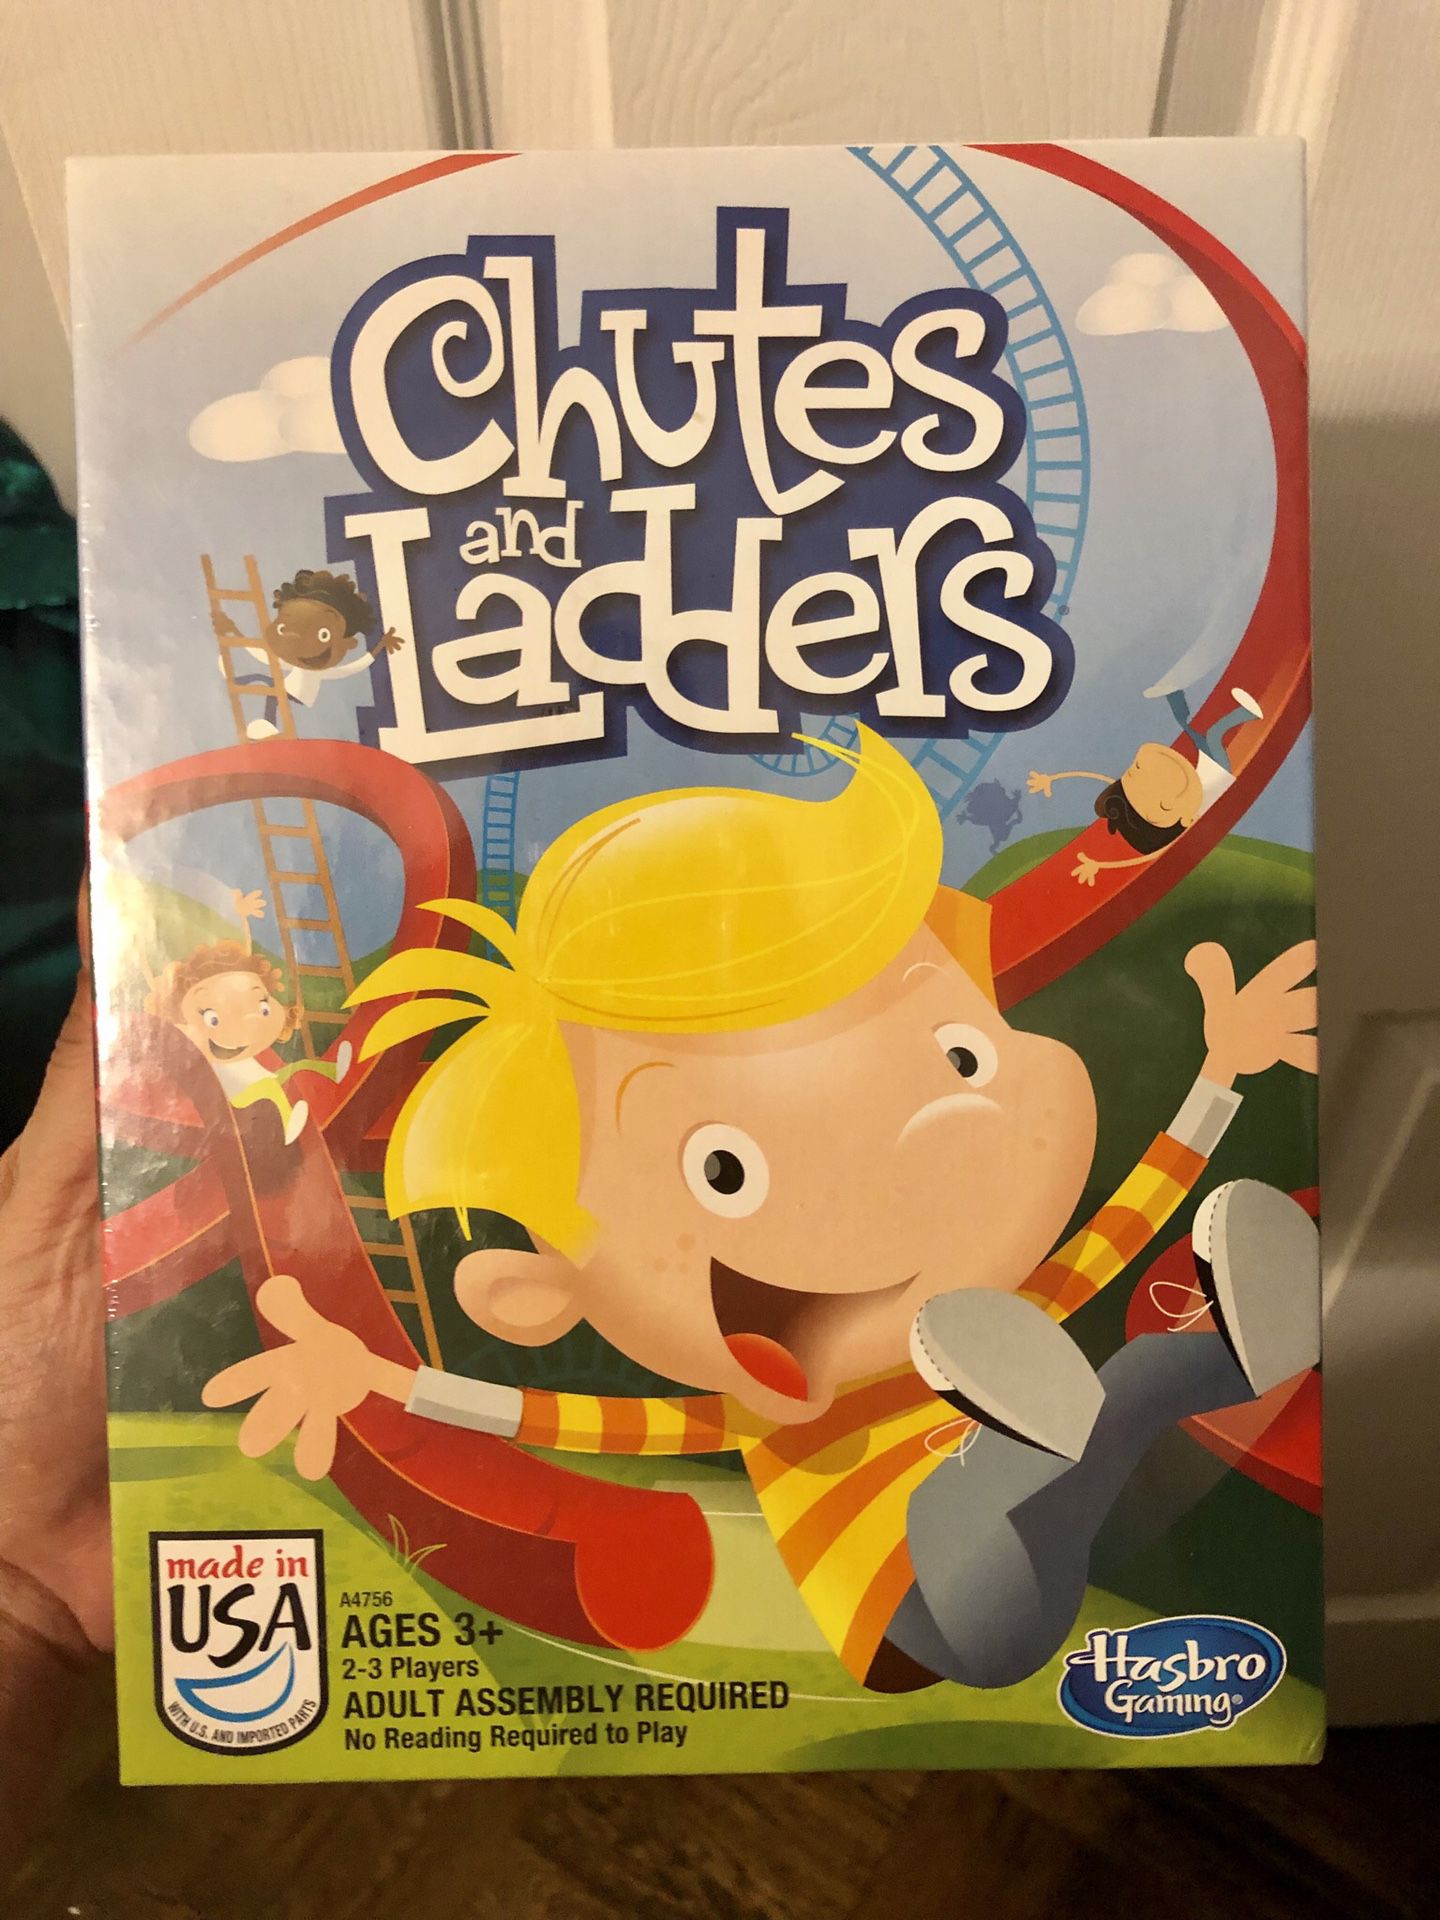 Chutes & Ladders Kids Classic Be the first to move your child-shaped playing piece from square one to square 100 on the Chutes and Ladders game board